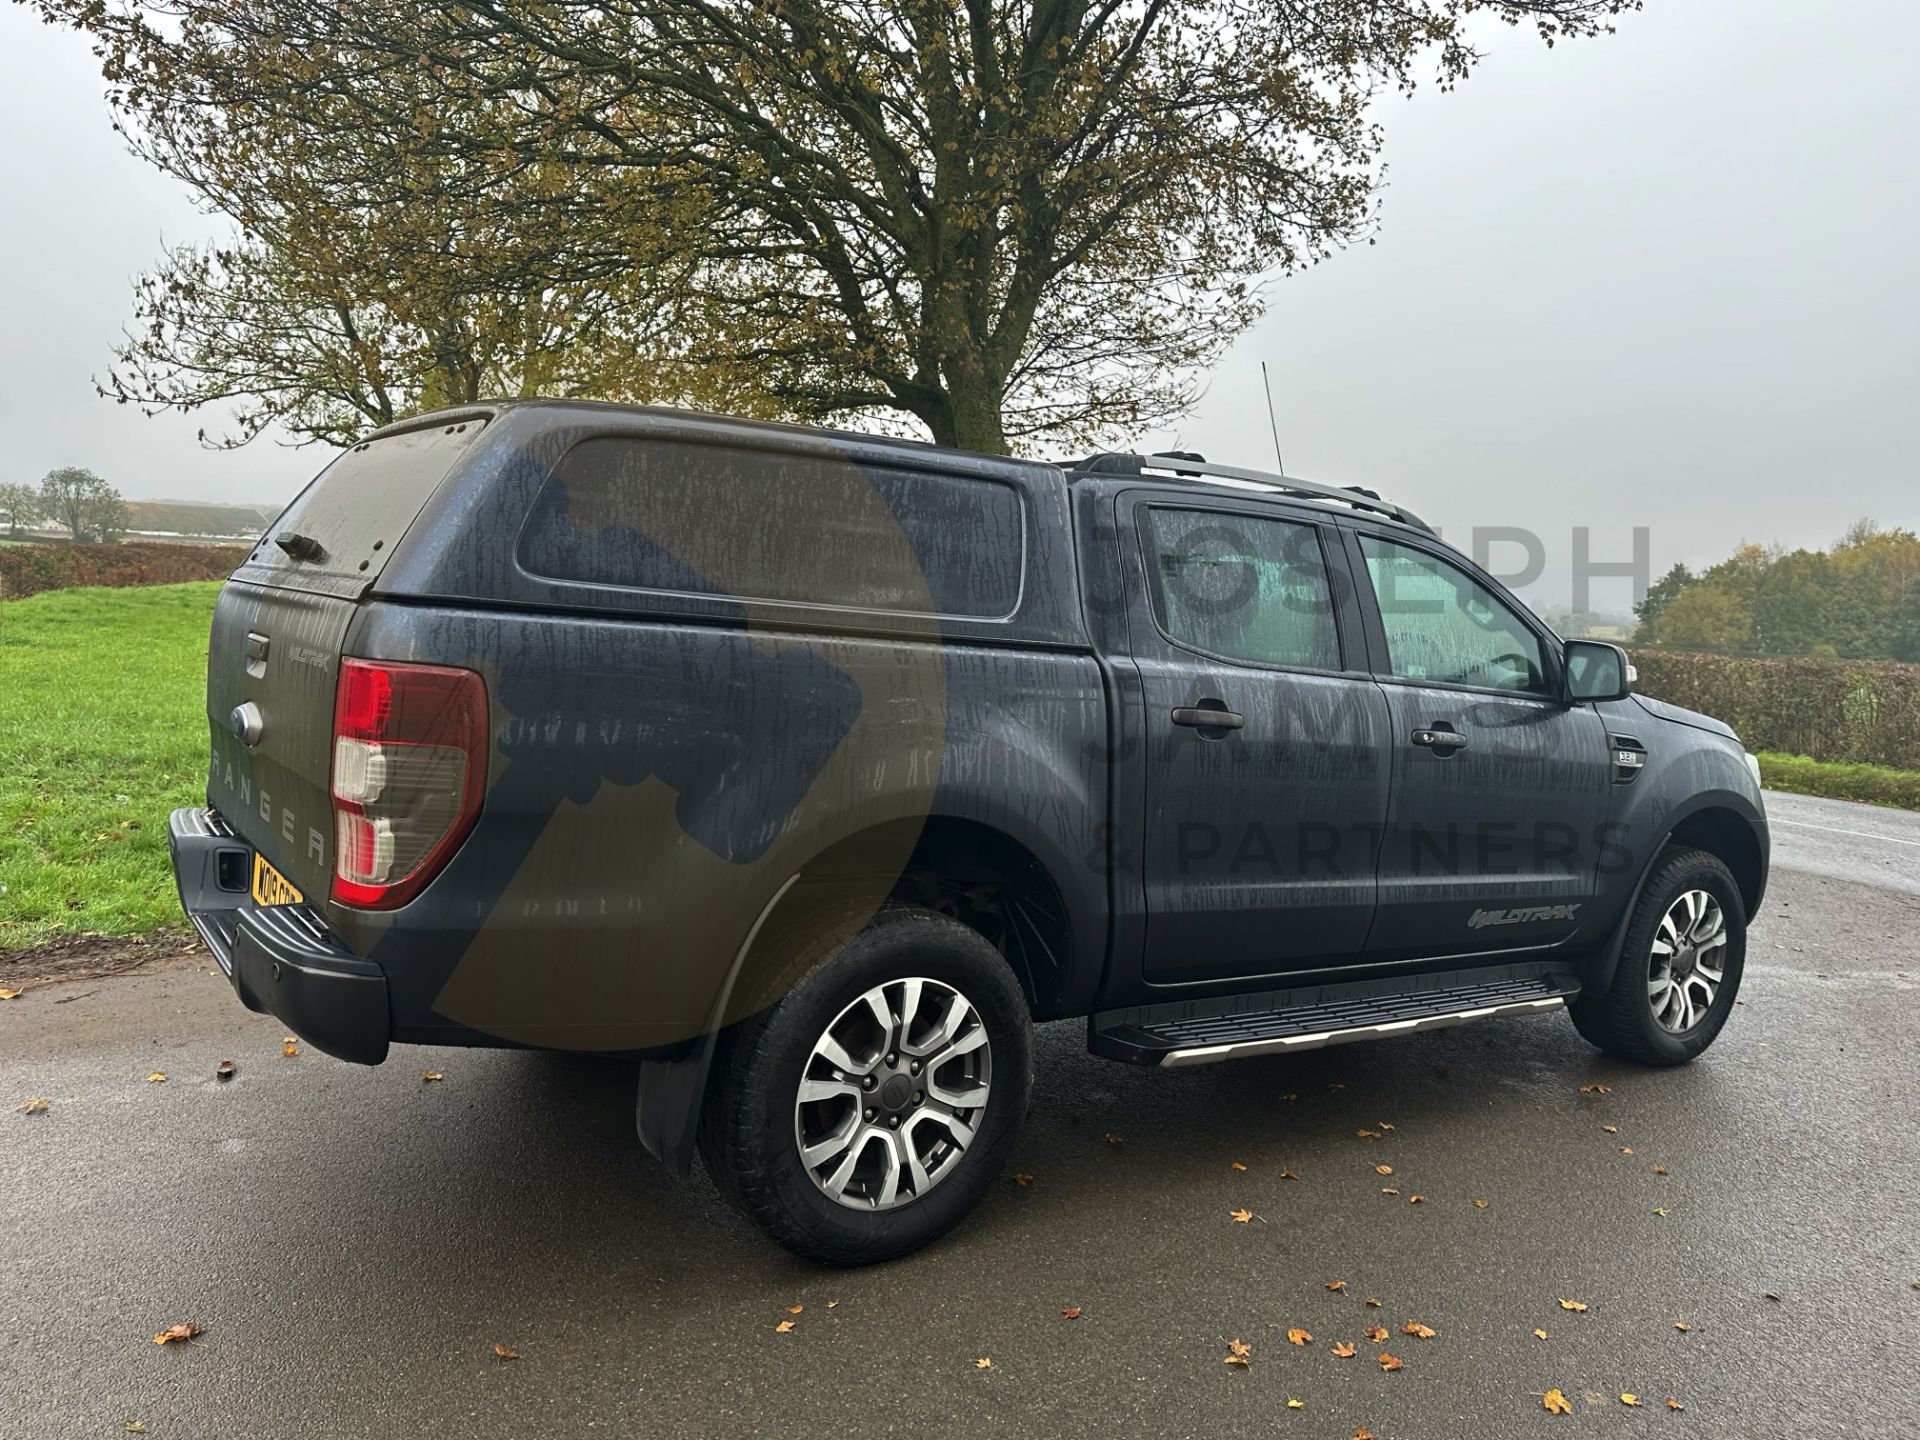 FORD RANGER *WILDTRAK EDITION* DOUBLE CAB PICK-UP (2019 - EURO 6) 3.2 TDCI - AUTOMATIC (1 OWNER) - Image 13 of 52